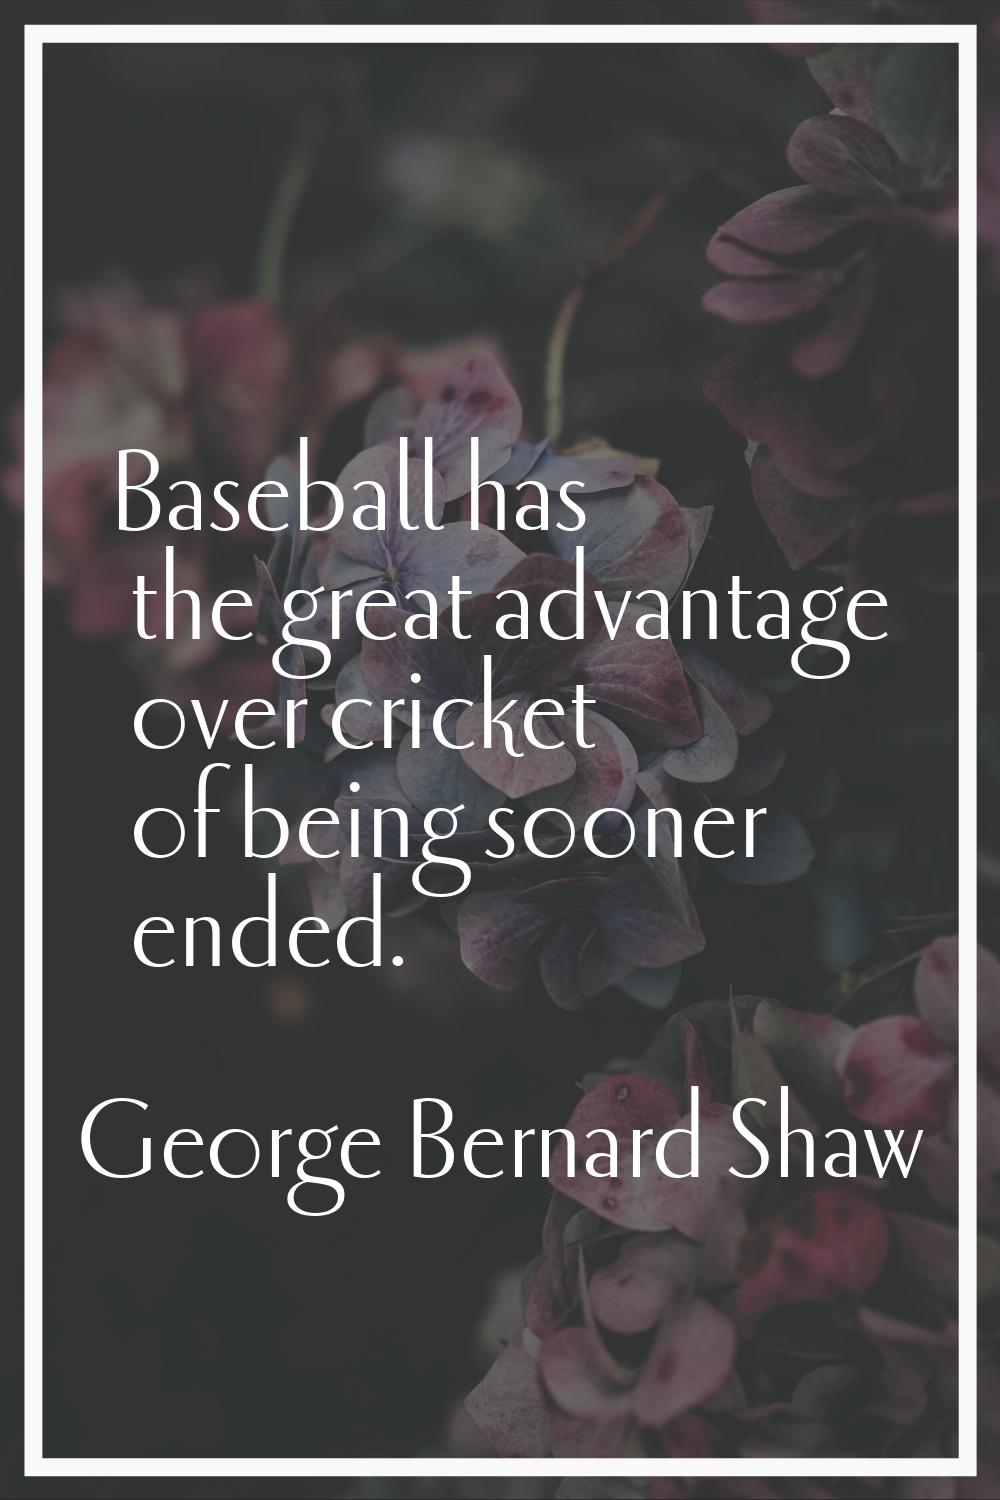 Baseball has the great advantage over cricket of being sooner ended.